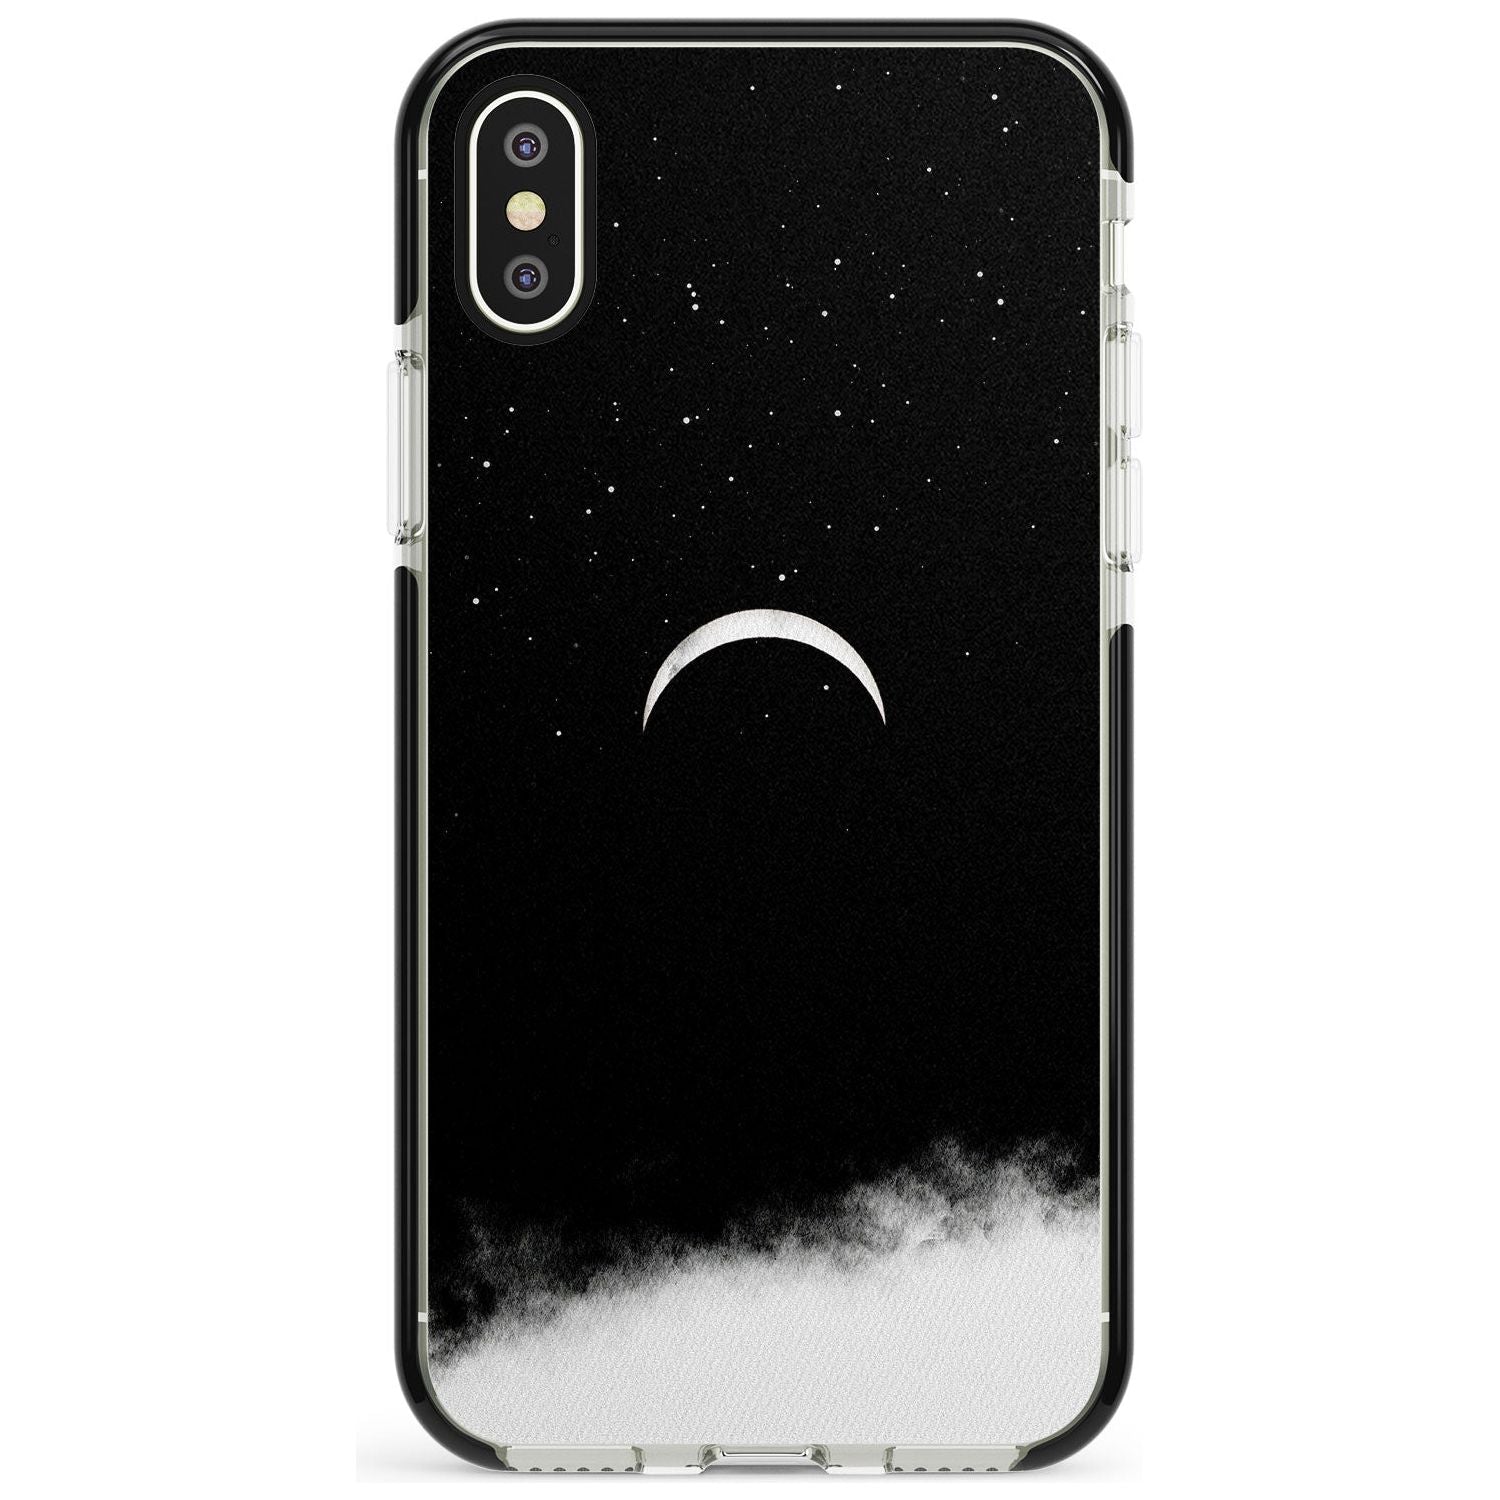 Upside Down Crescent Moon Black Impact Phone Case for iPhone X XS Max XR